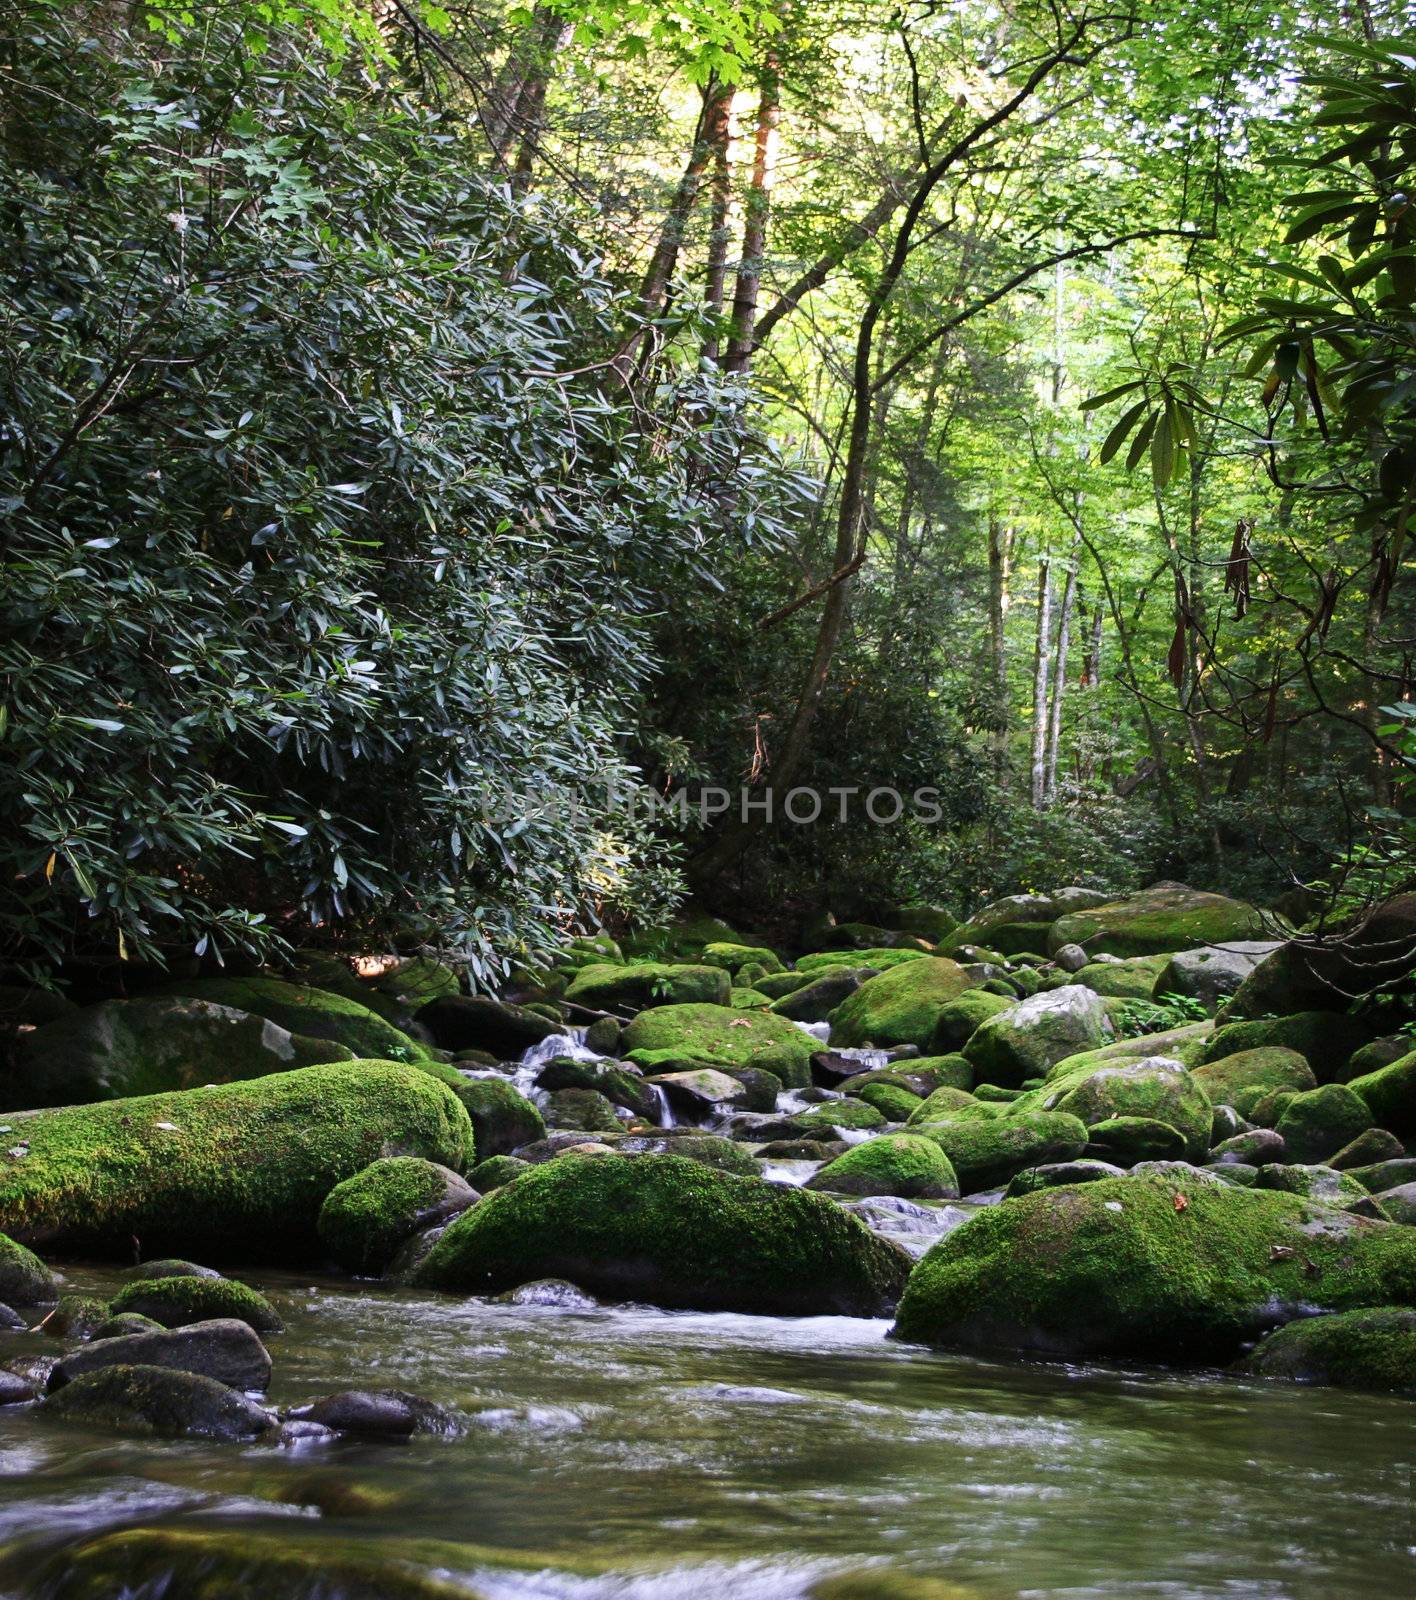 Rural River with Mossy Rocks by steheap